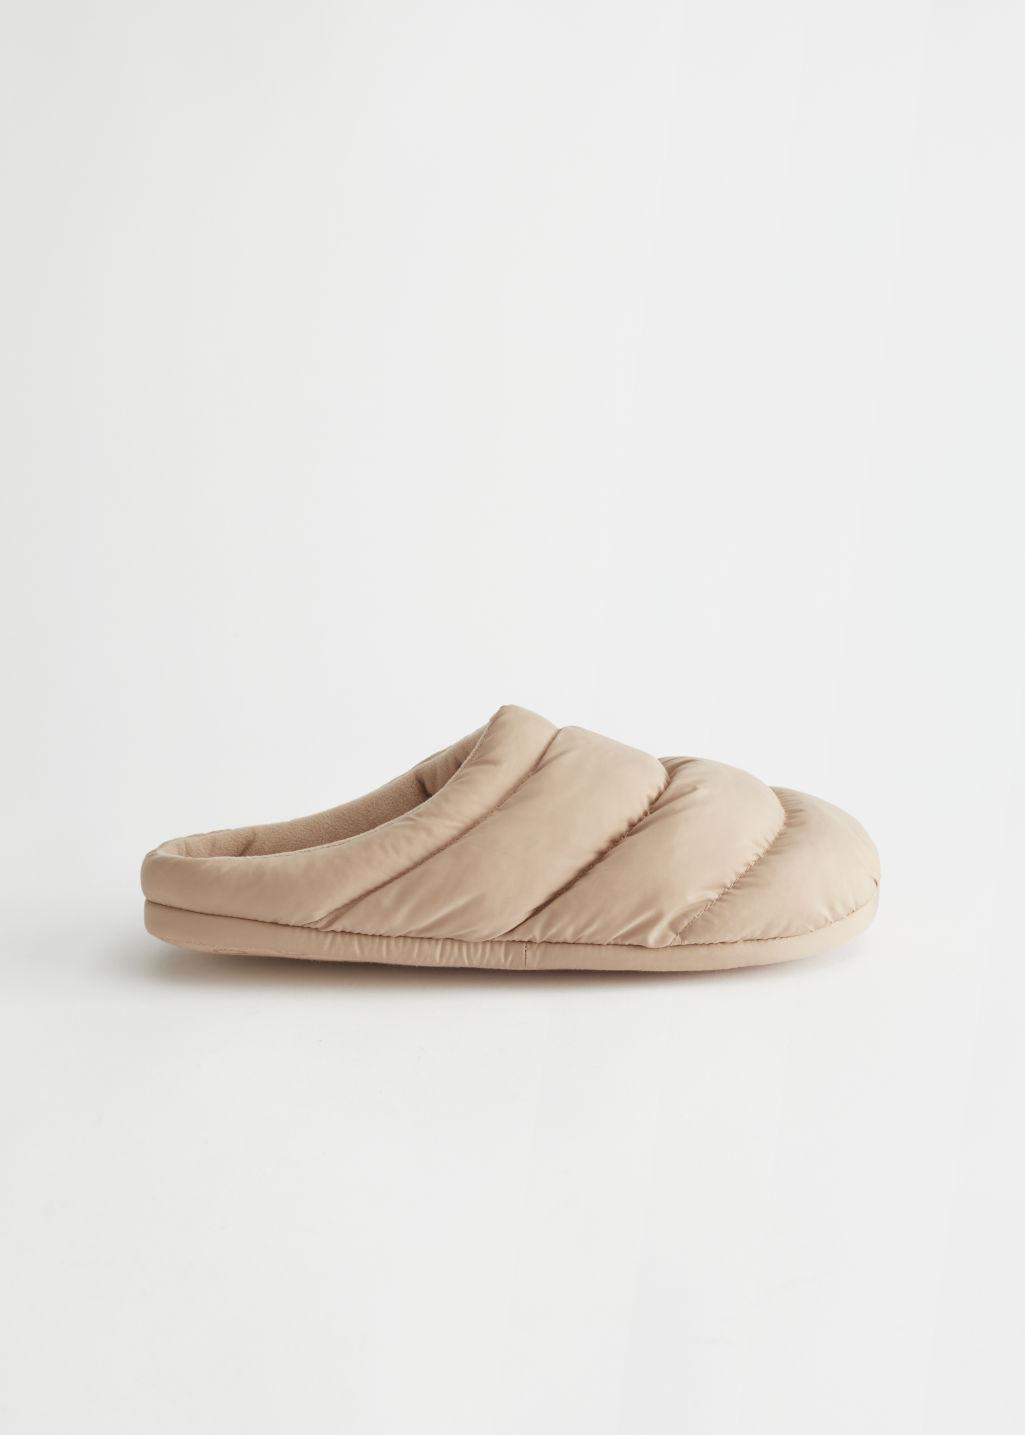 & Other Stories Padded Slippers in Natural | Lyst